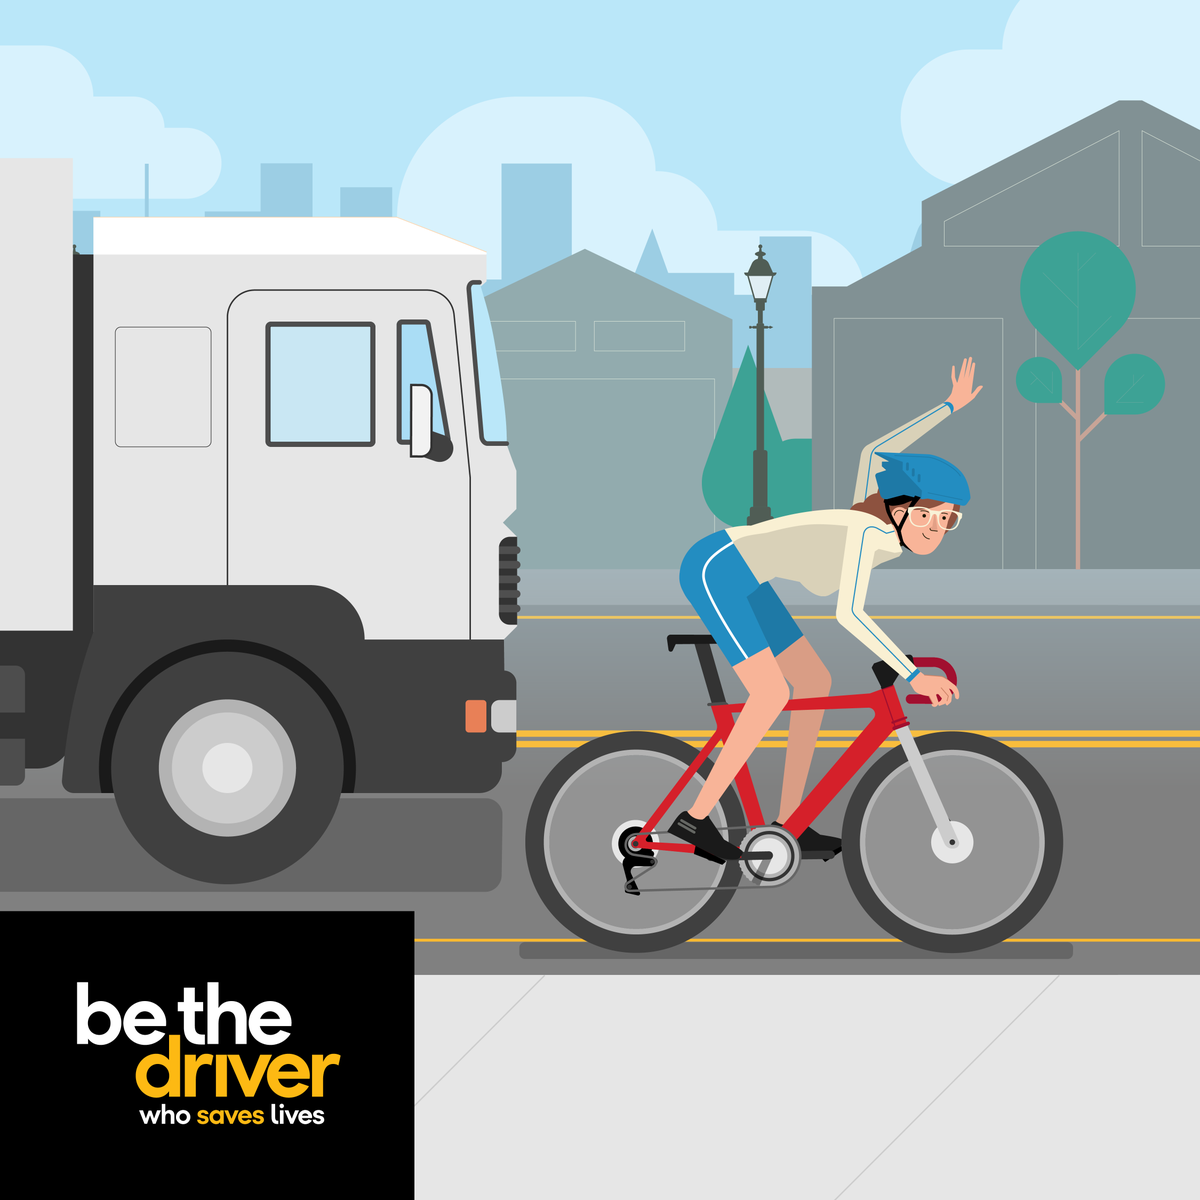 Show your bike some love with a safety check-up: Inspect for proper fit and function, including tires, brakes, handlebars and seats. #BicycleSafety #BeTheDriver